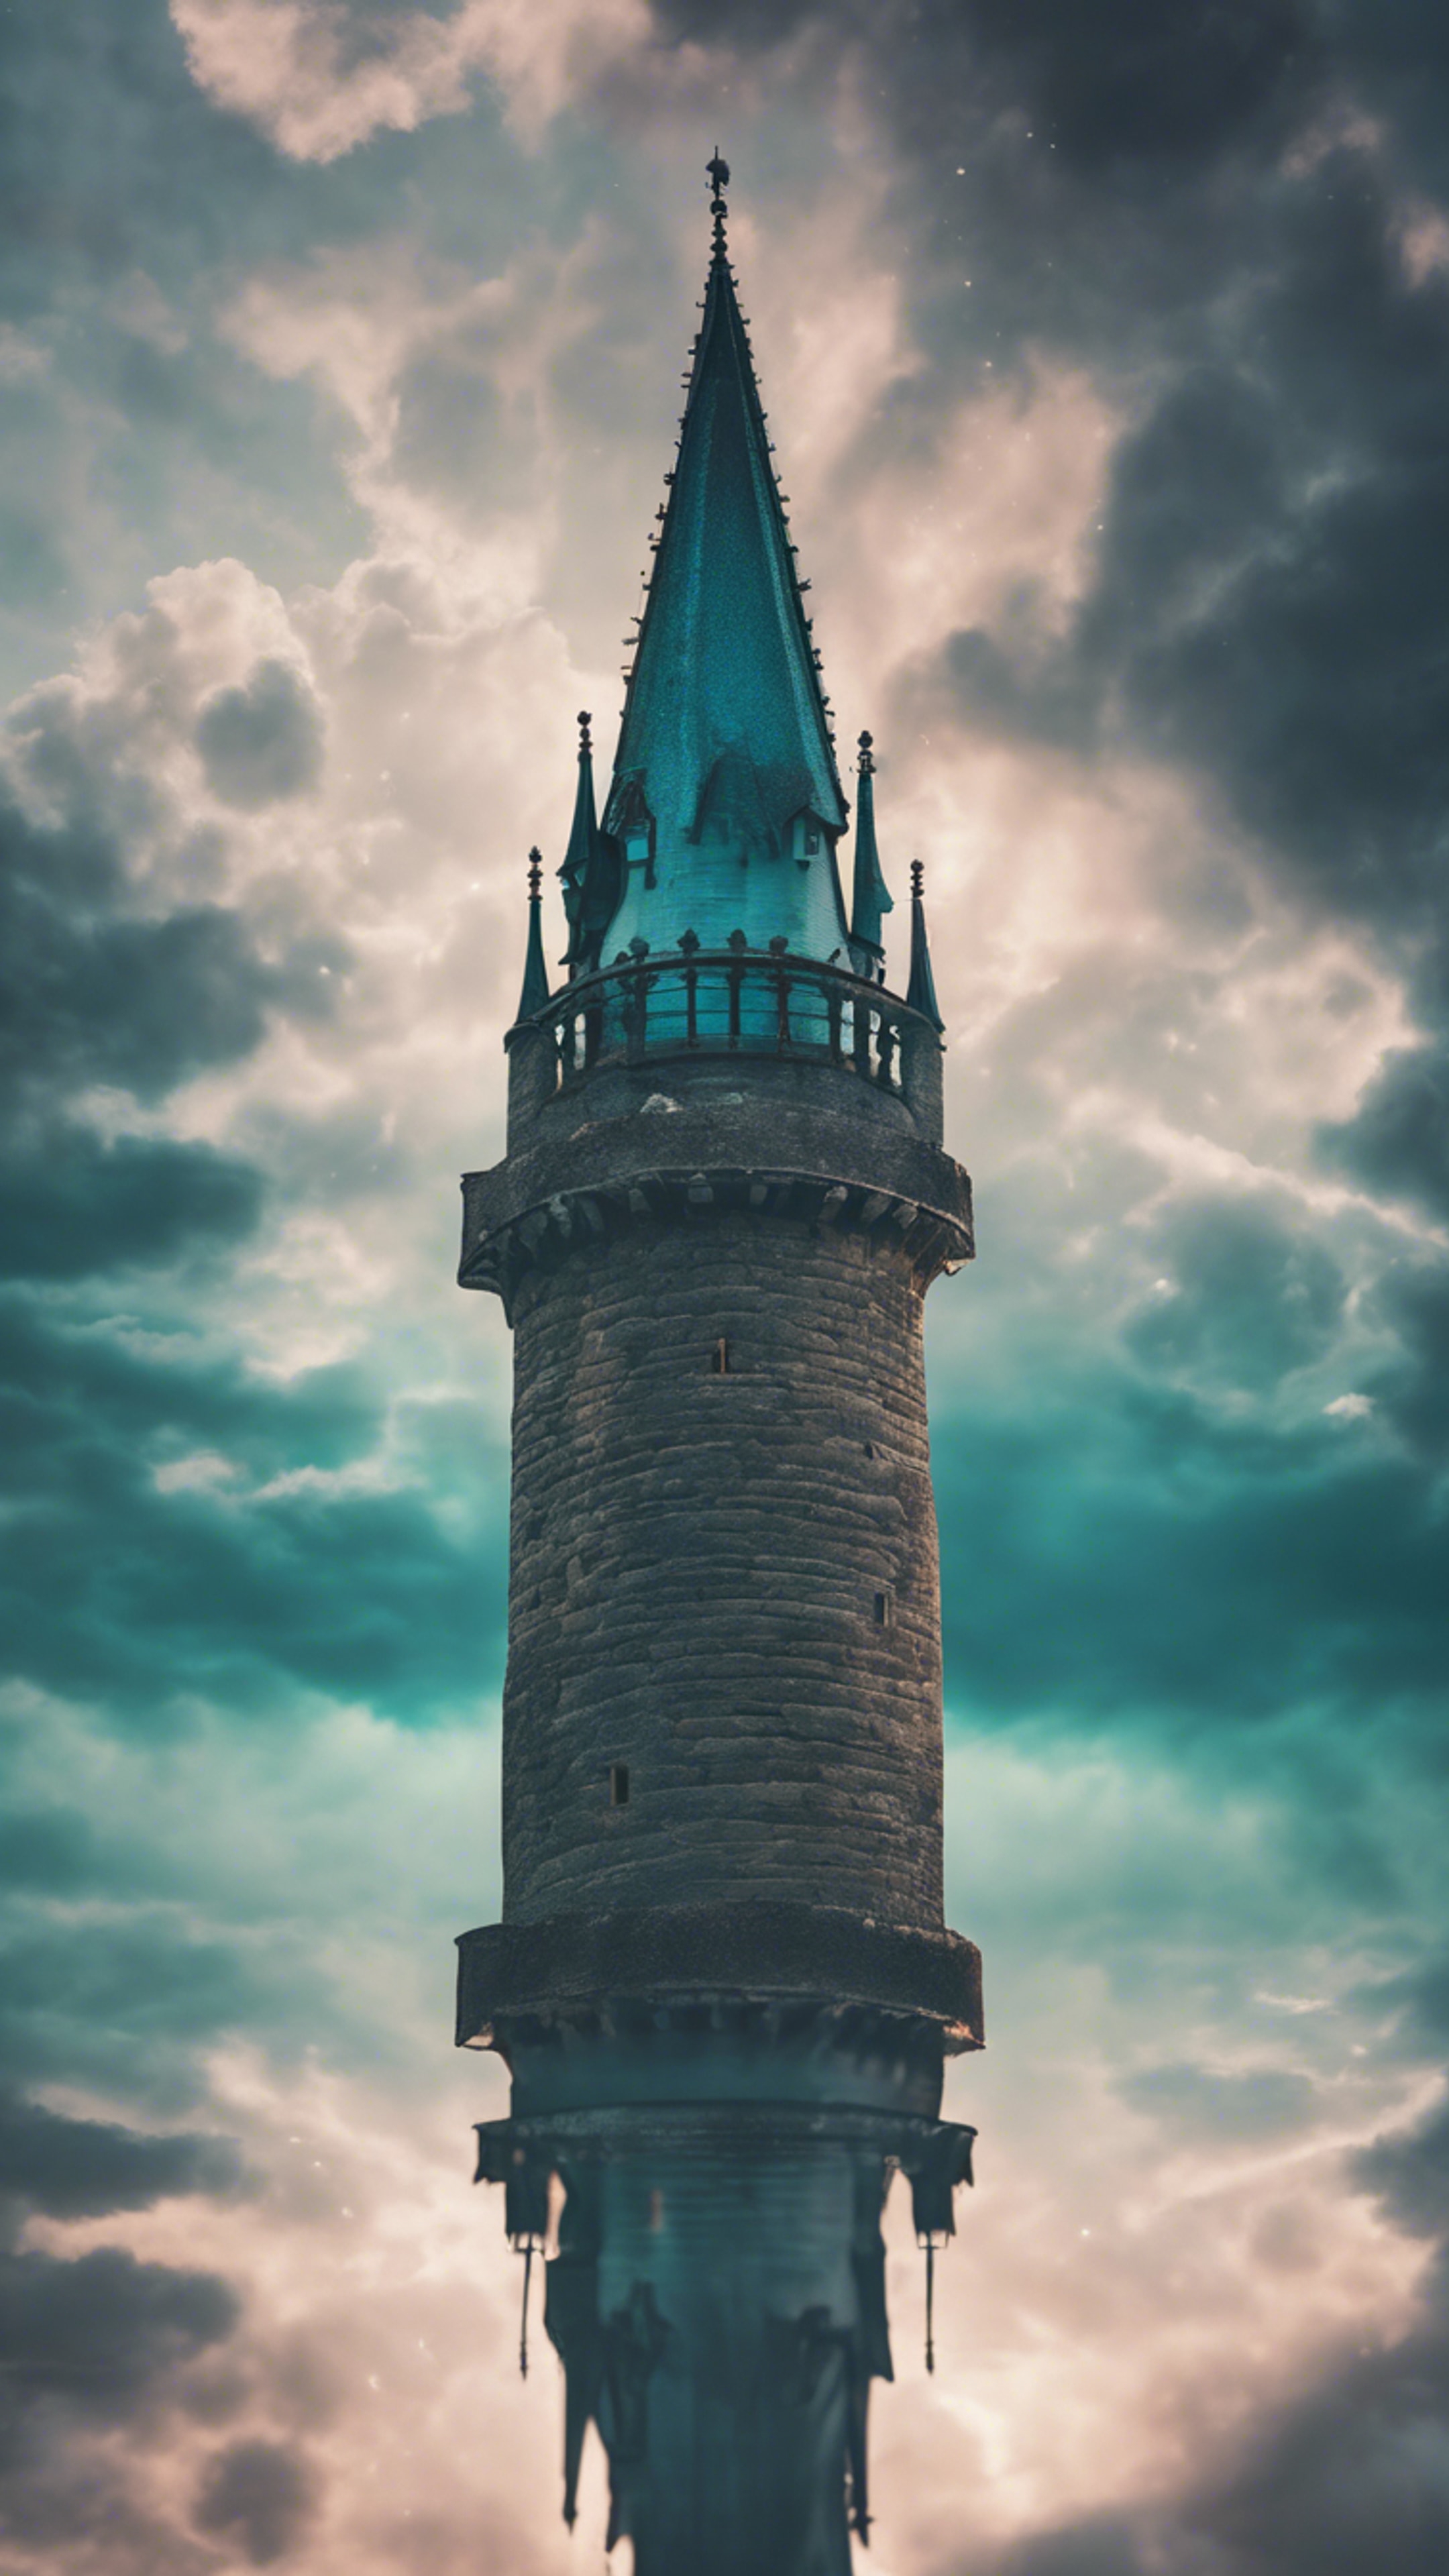 A Gothic castle tower reaching into the clouds, lit from within by mystery teal lights. 벽지[95b6d3de171842619bd4]